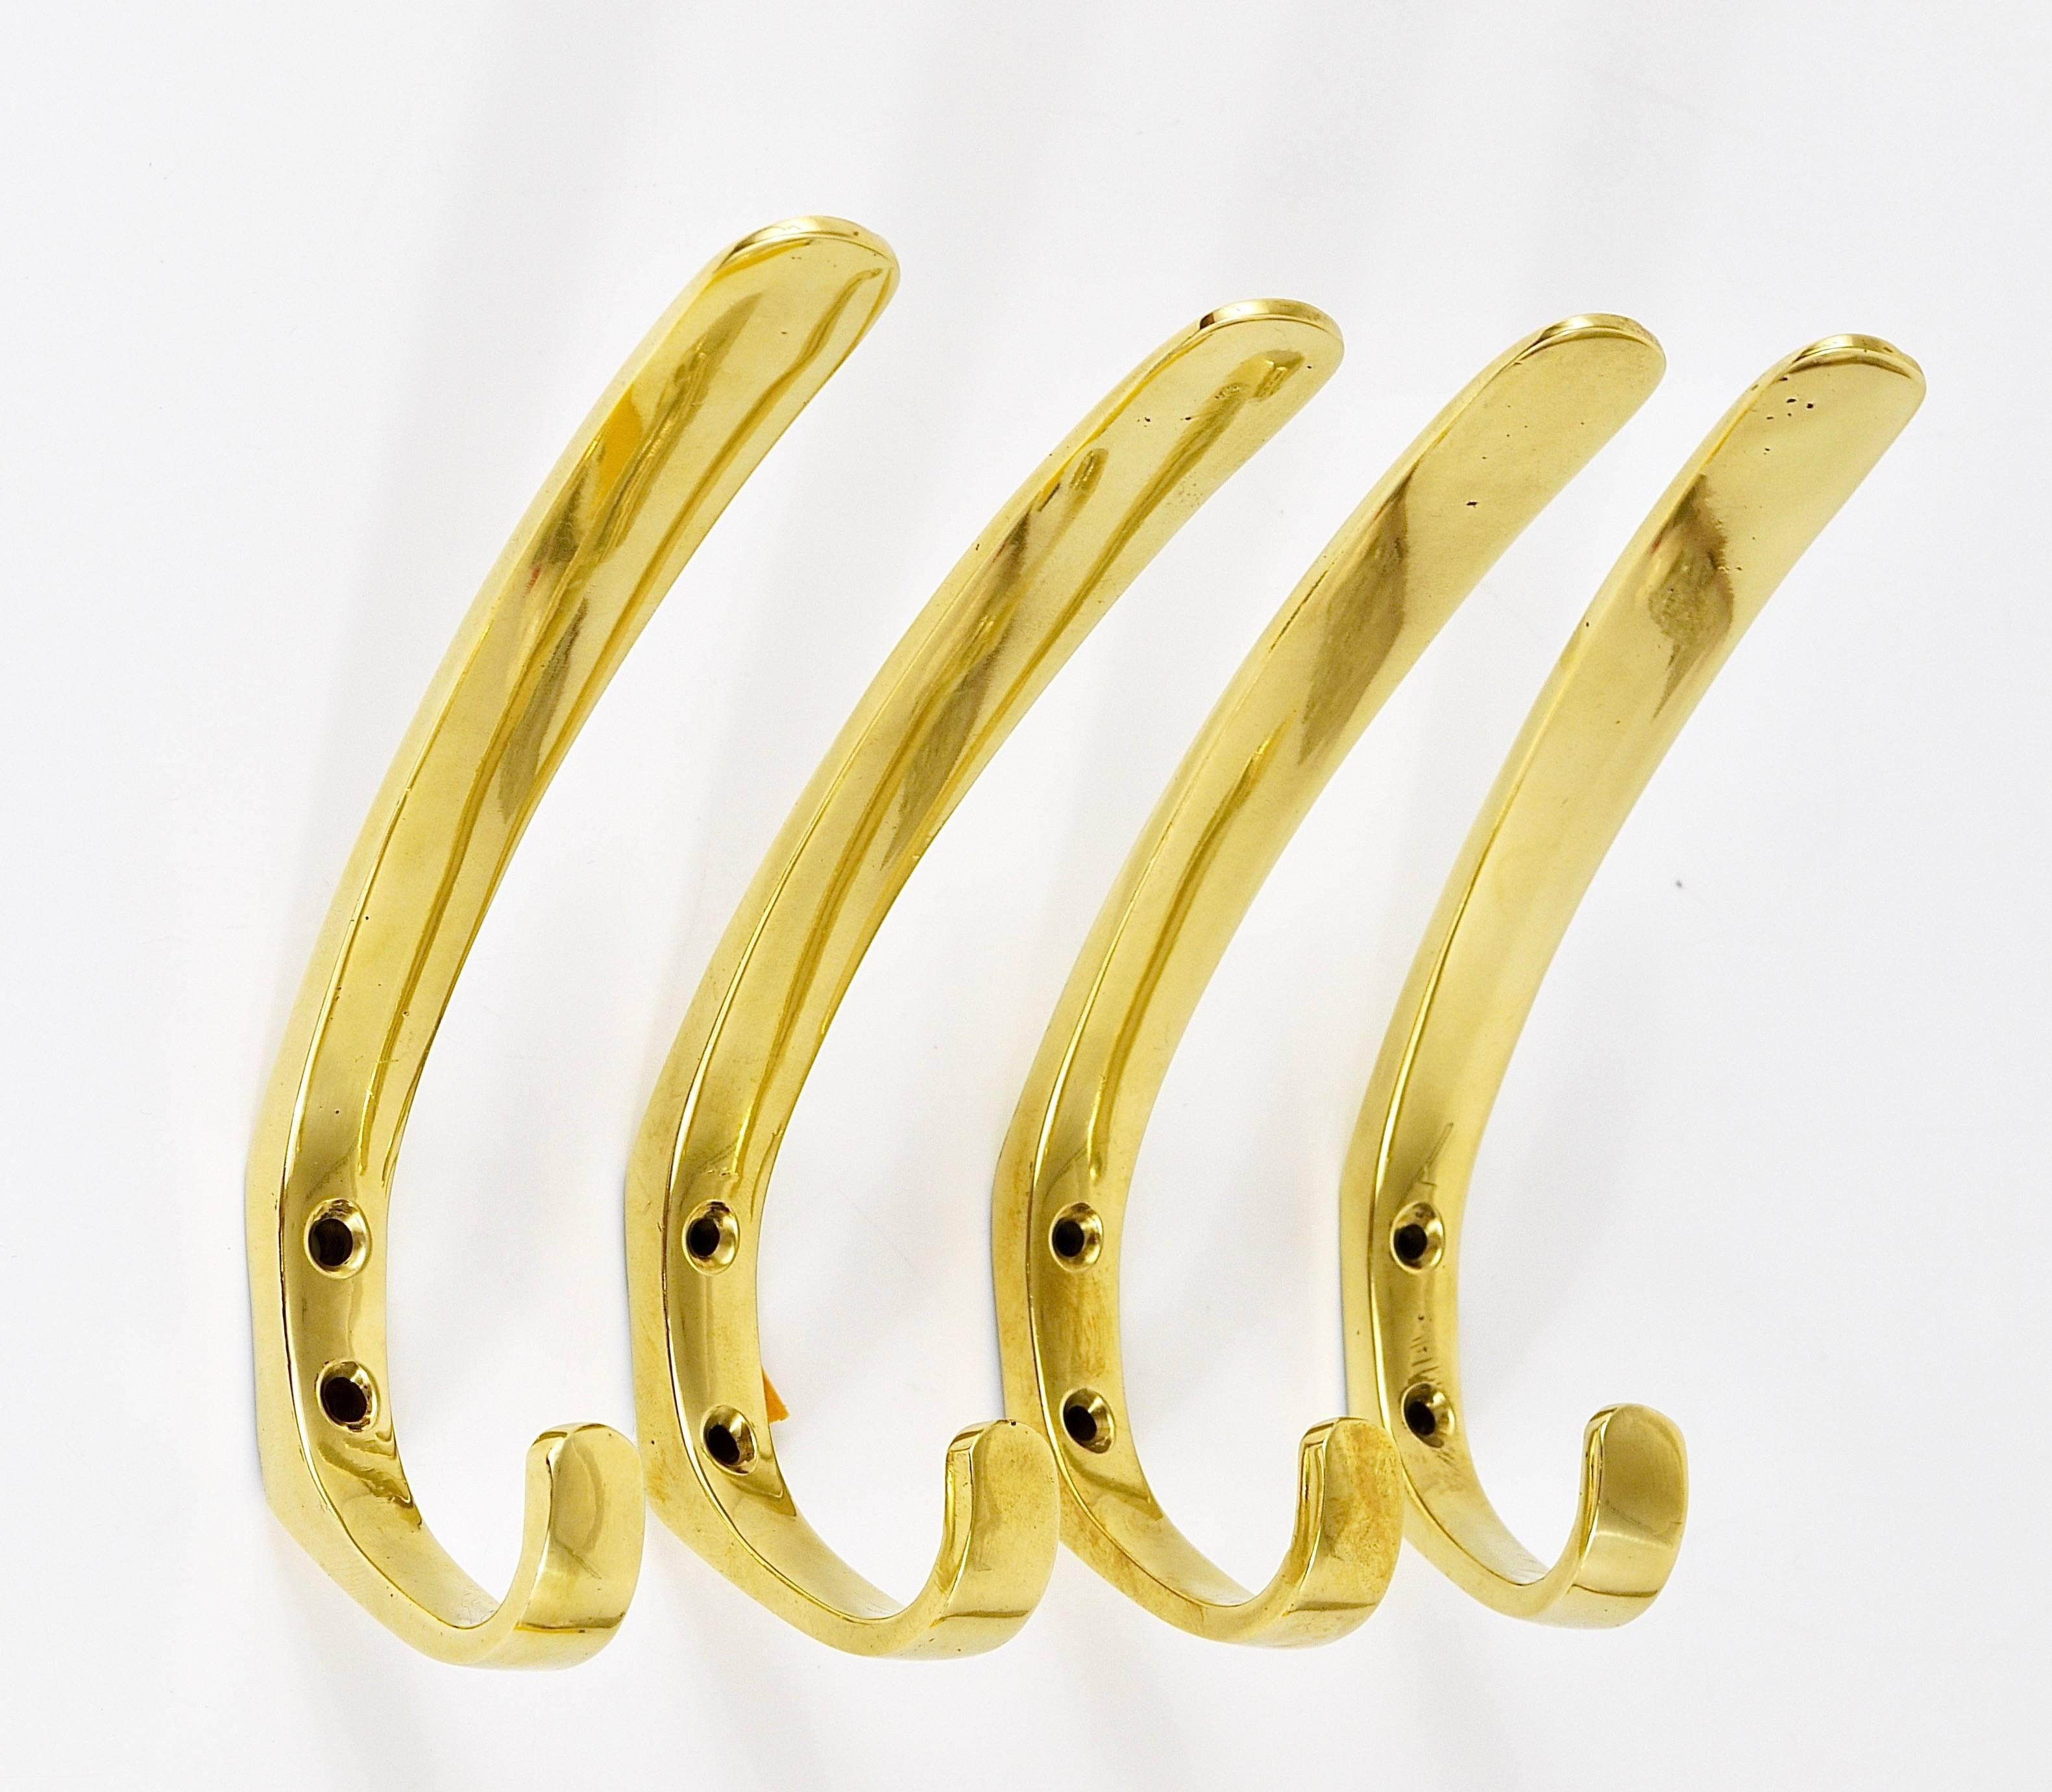 Up to Three Mid-Century Brass Wall Coat Hooks by Herta Baller, Austria, 1950s For Sale 1